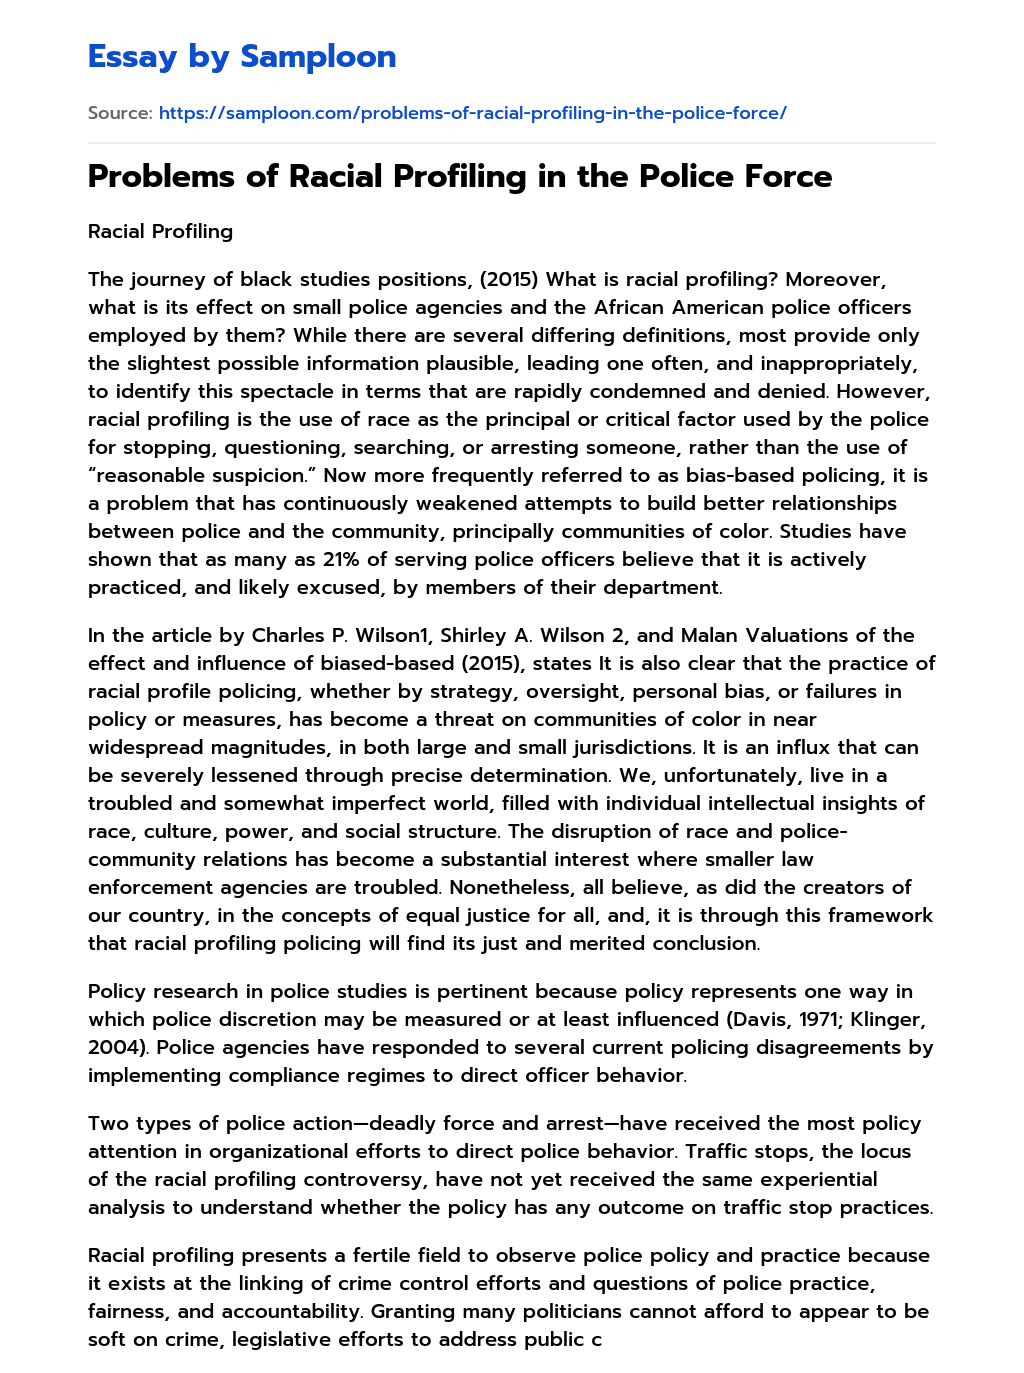 Problems of Racial Profiling in the Police Force essay